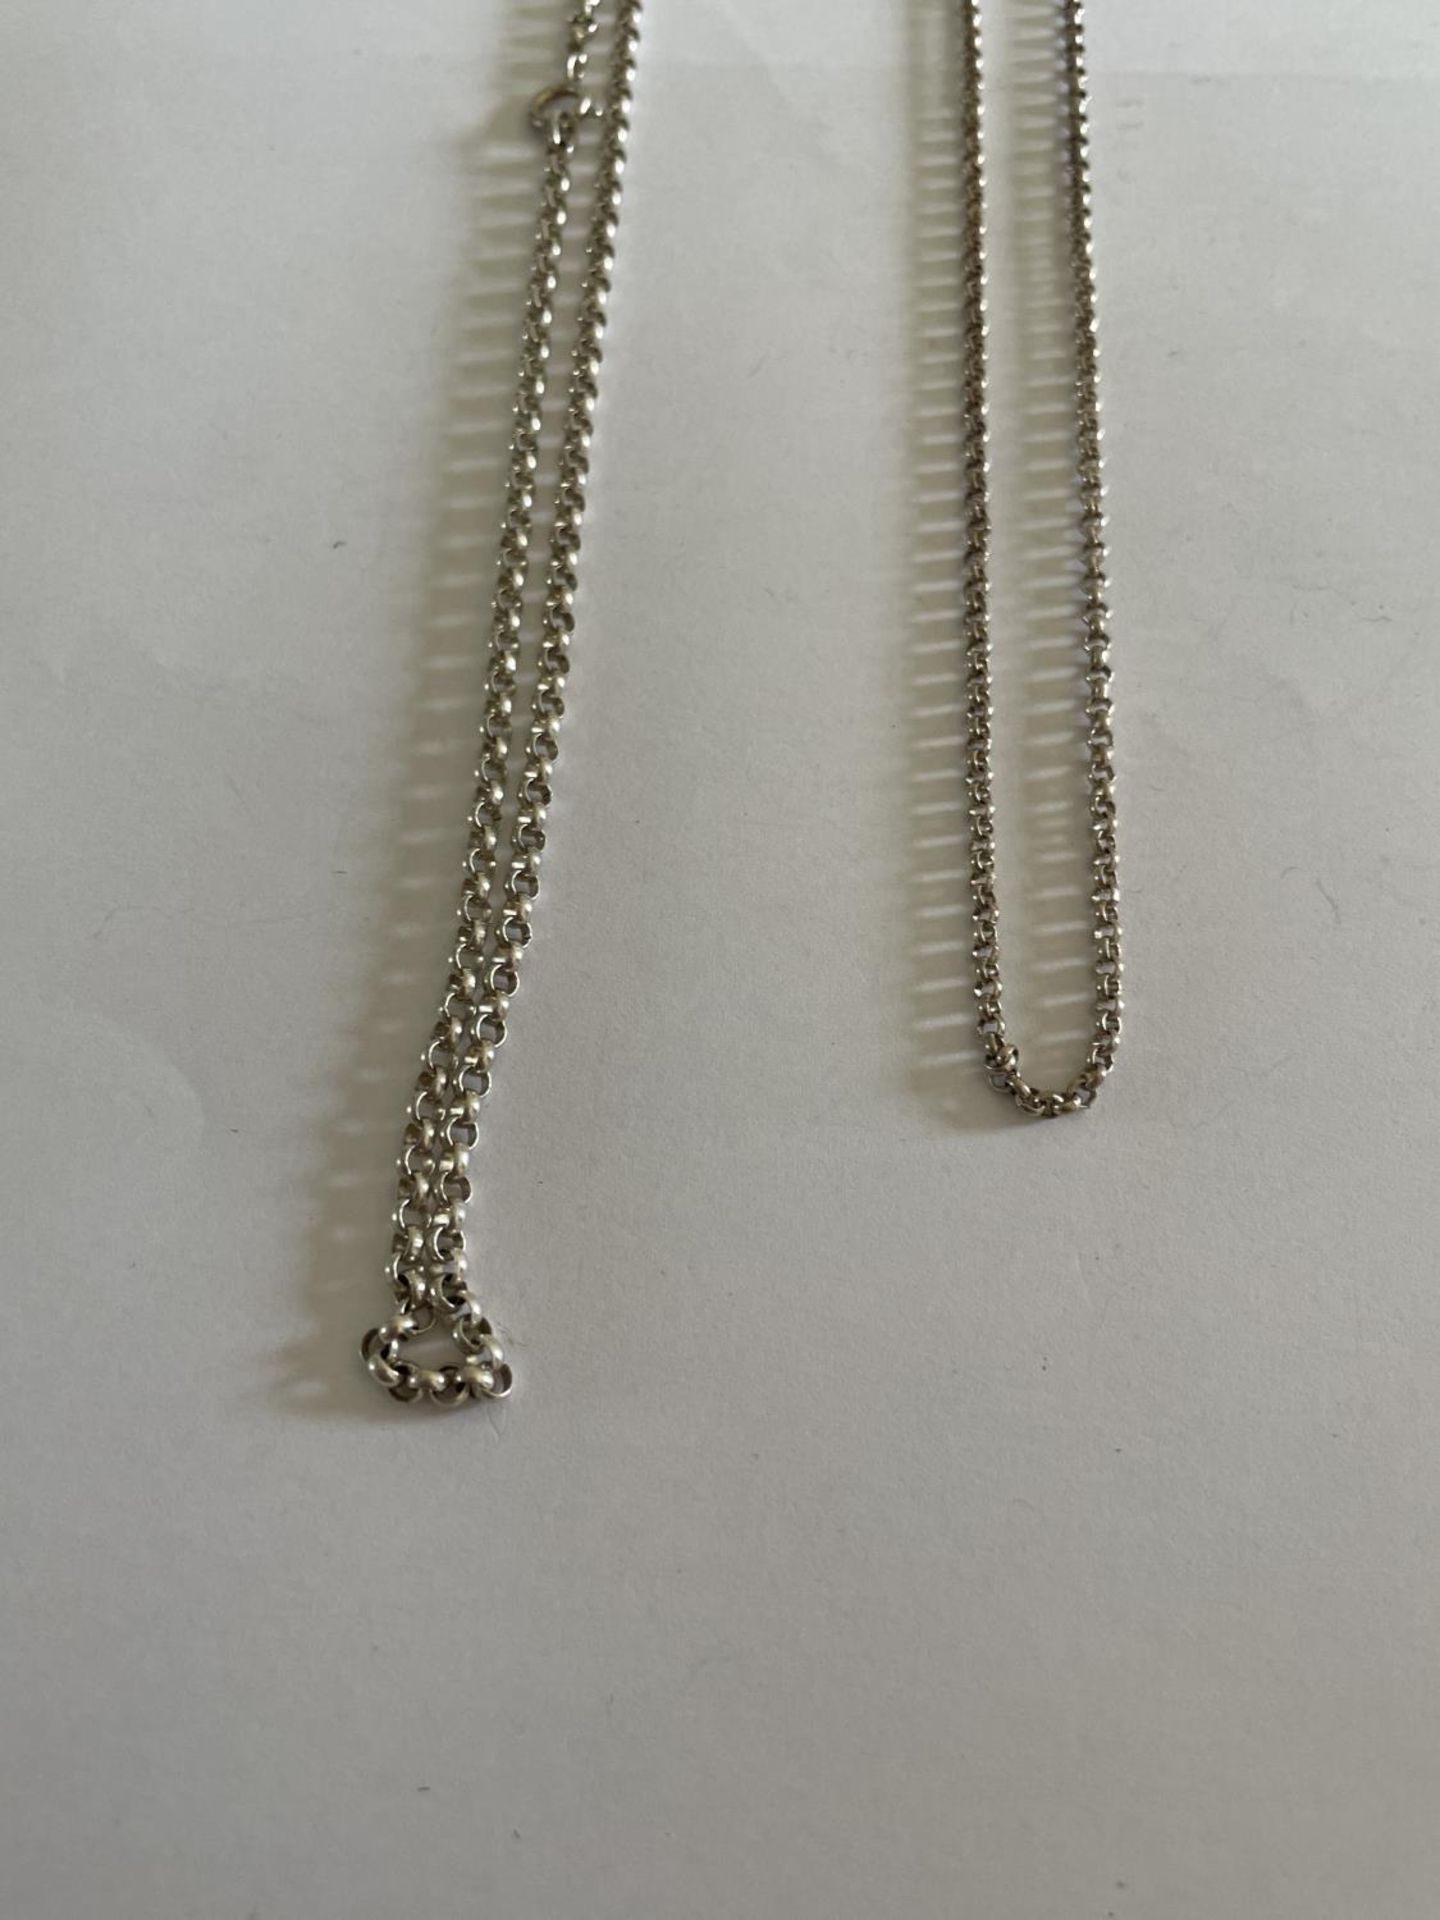 TWO SILVER BELCHER CHAIN NECKLACES - Image 2 of 2